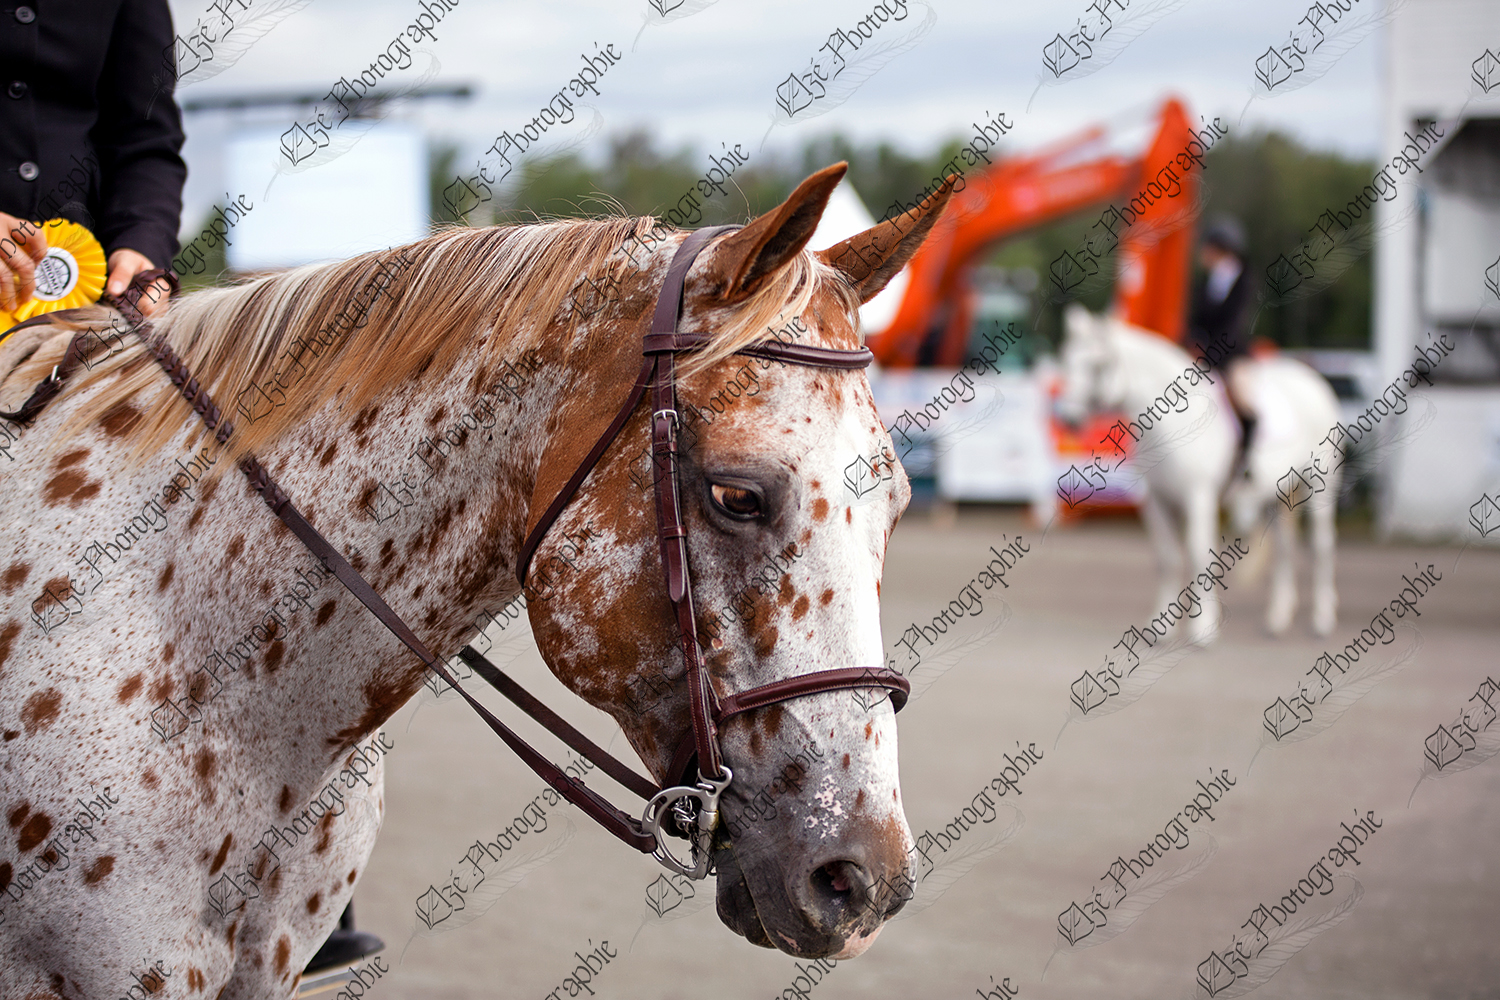 elze_photo_5638_cheval_selle_anglaise_spectacle_horse_competition